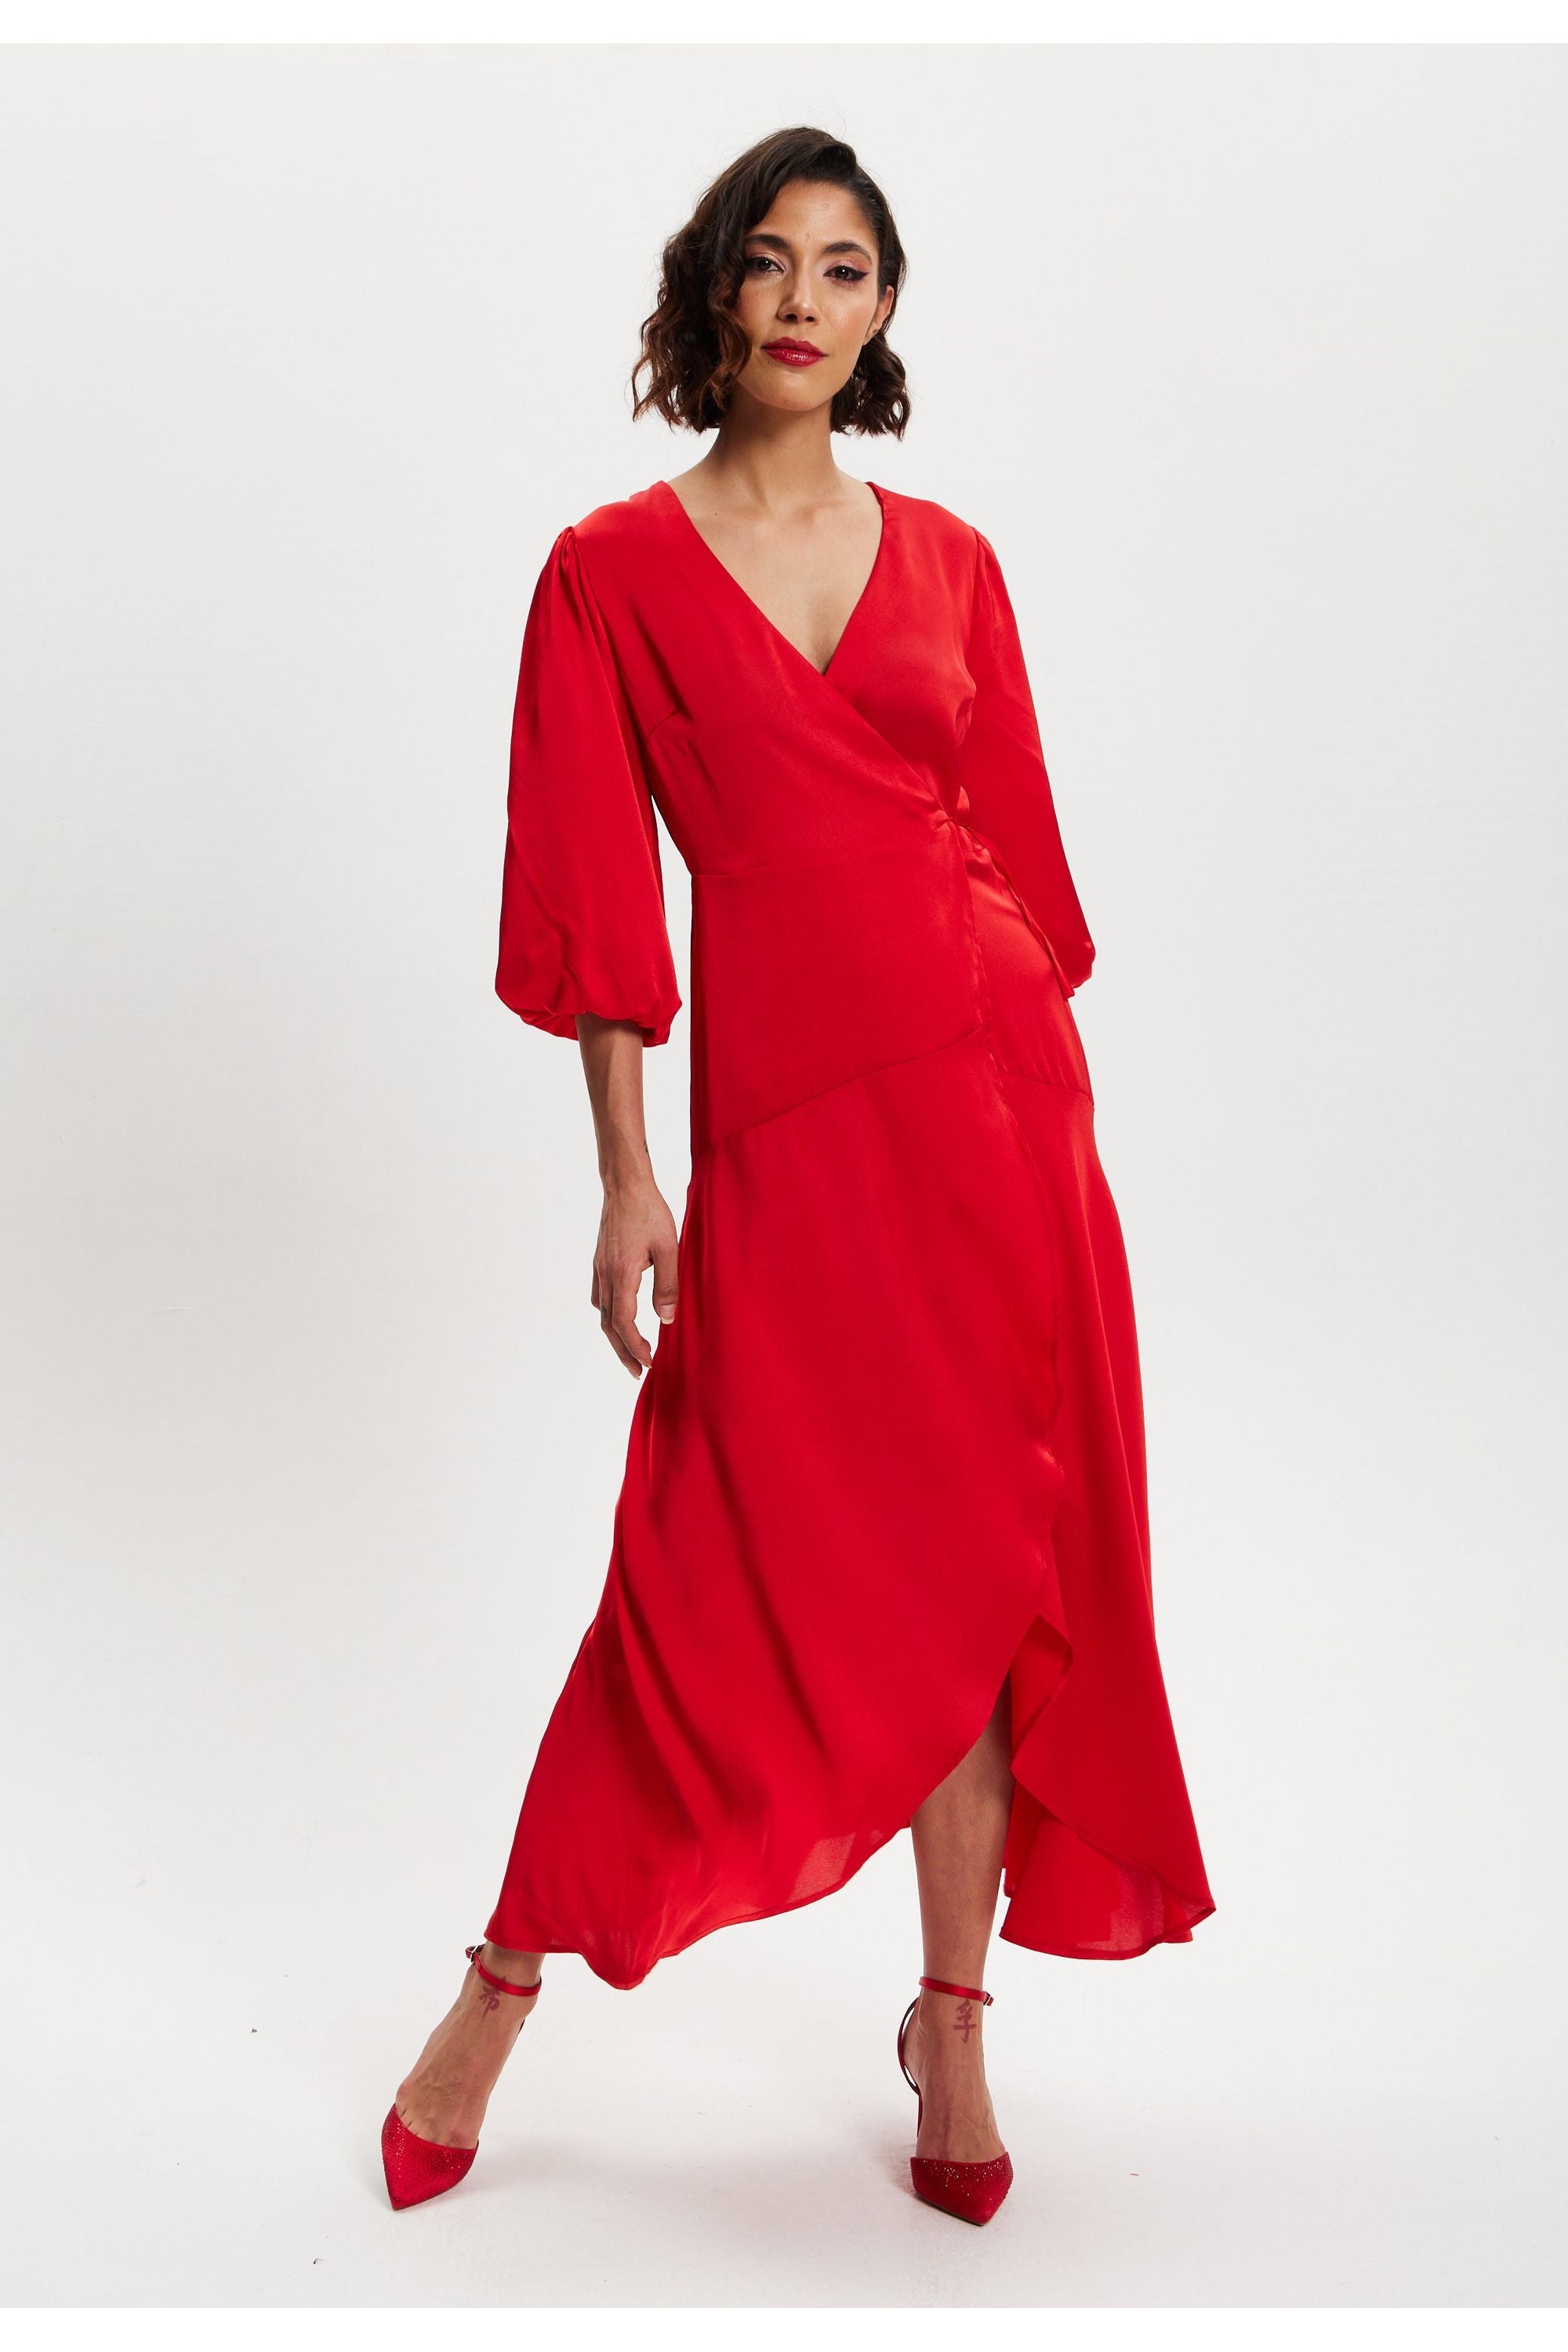 Red Midi Wrap Dress With Short Puff Sleeves LIQ20-128Red